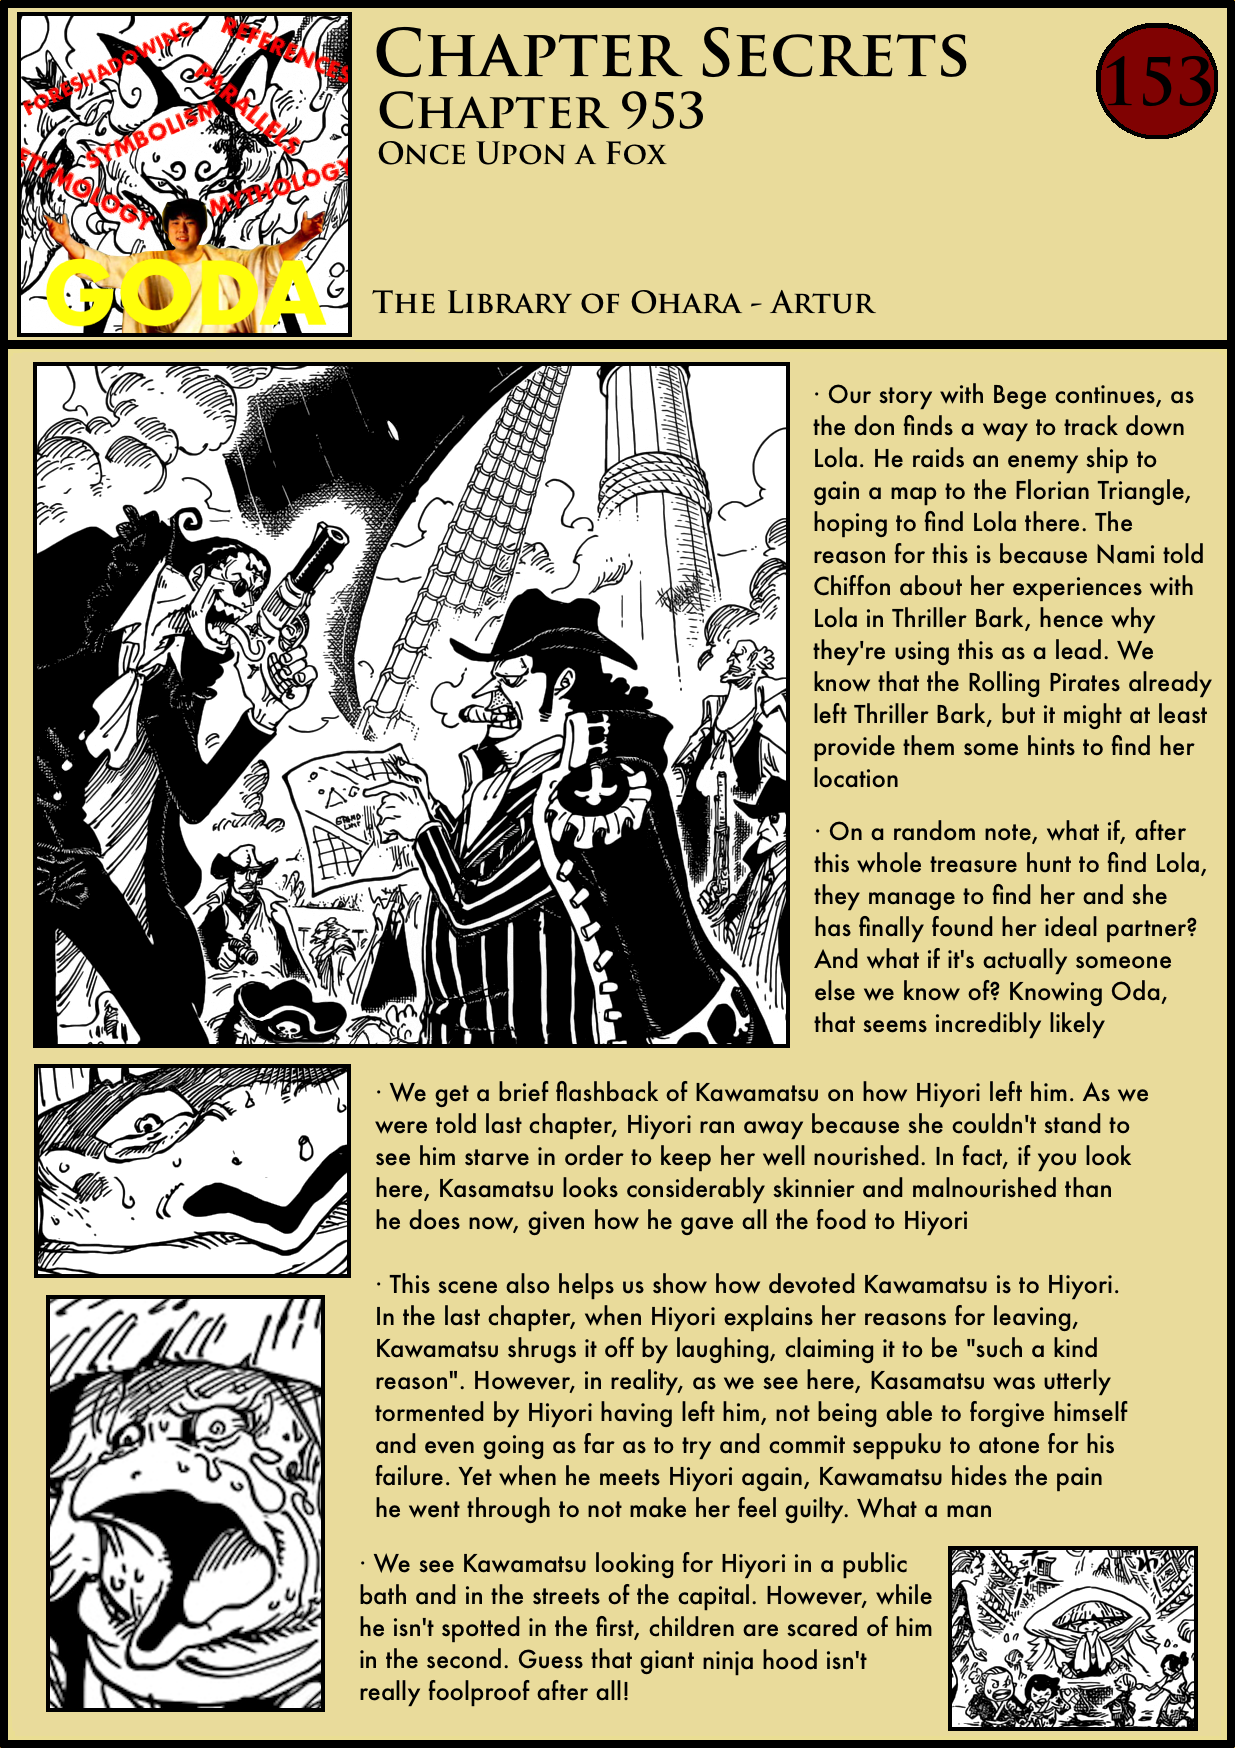 Chapter Secrets Chapter 953 In Depth Analysis The Library Of Ohara